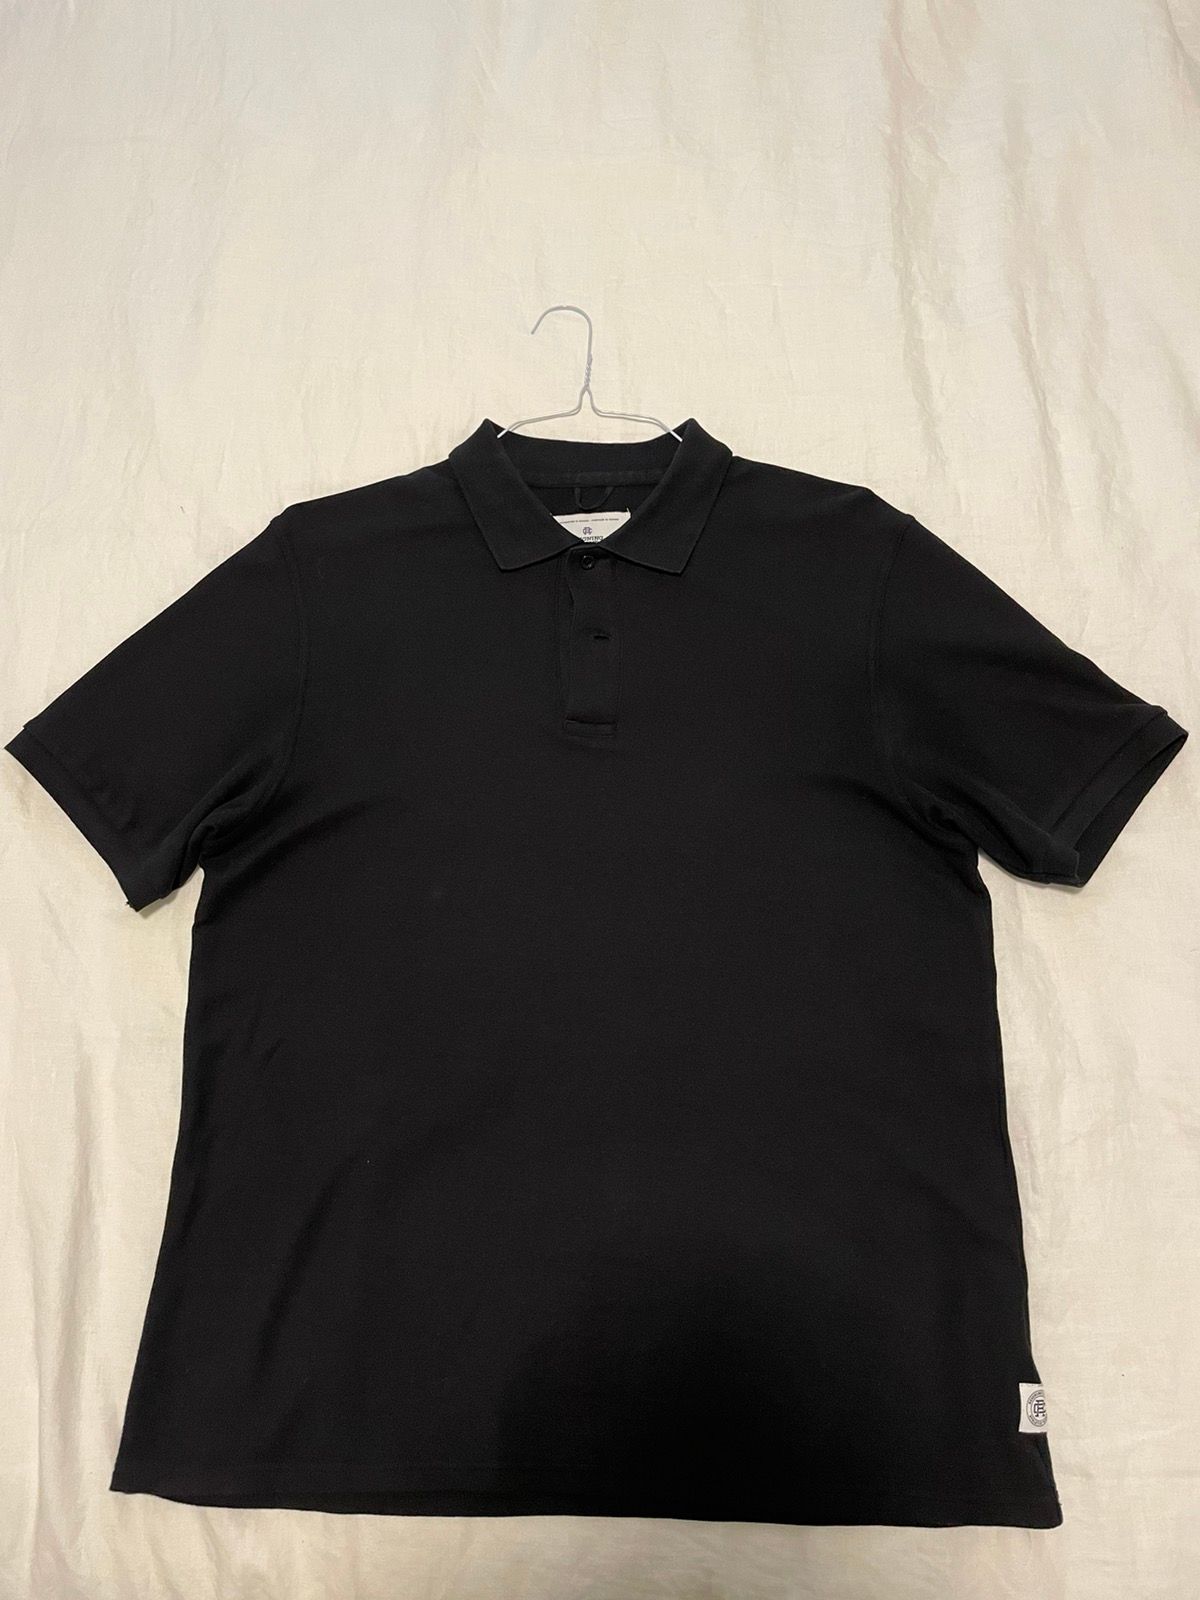 Reigning Champ Reigning Champ Black Pique Polo | Grailed